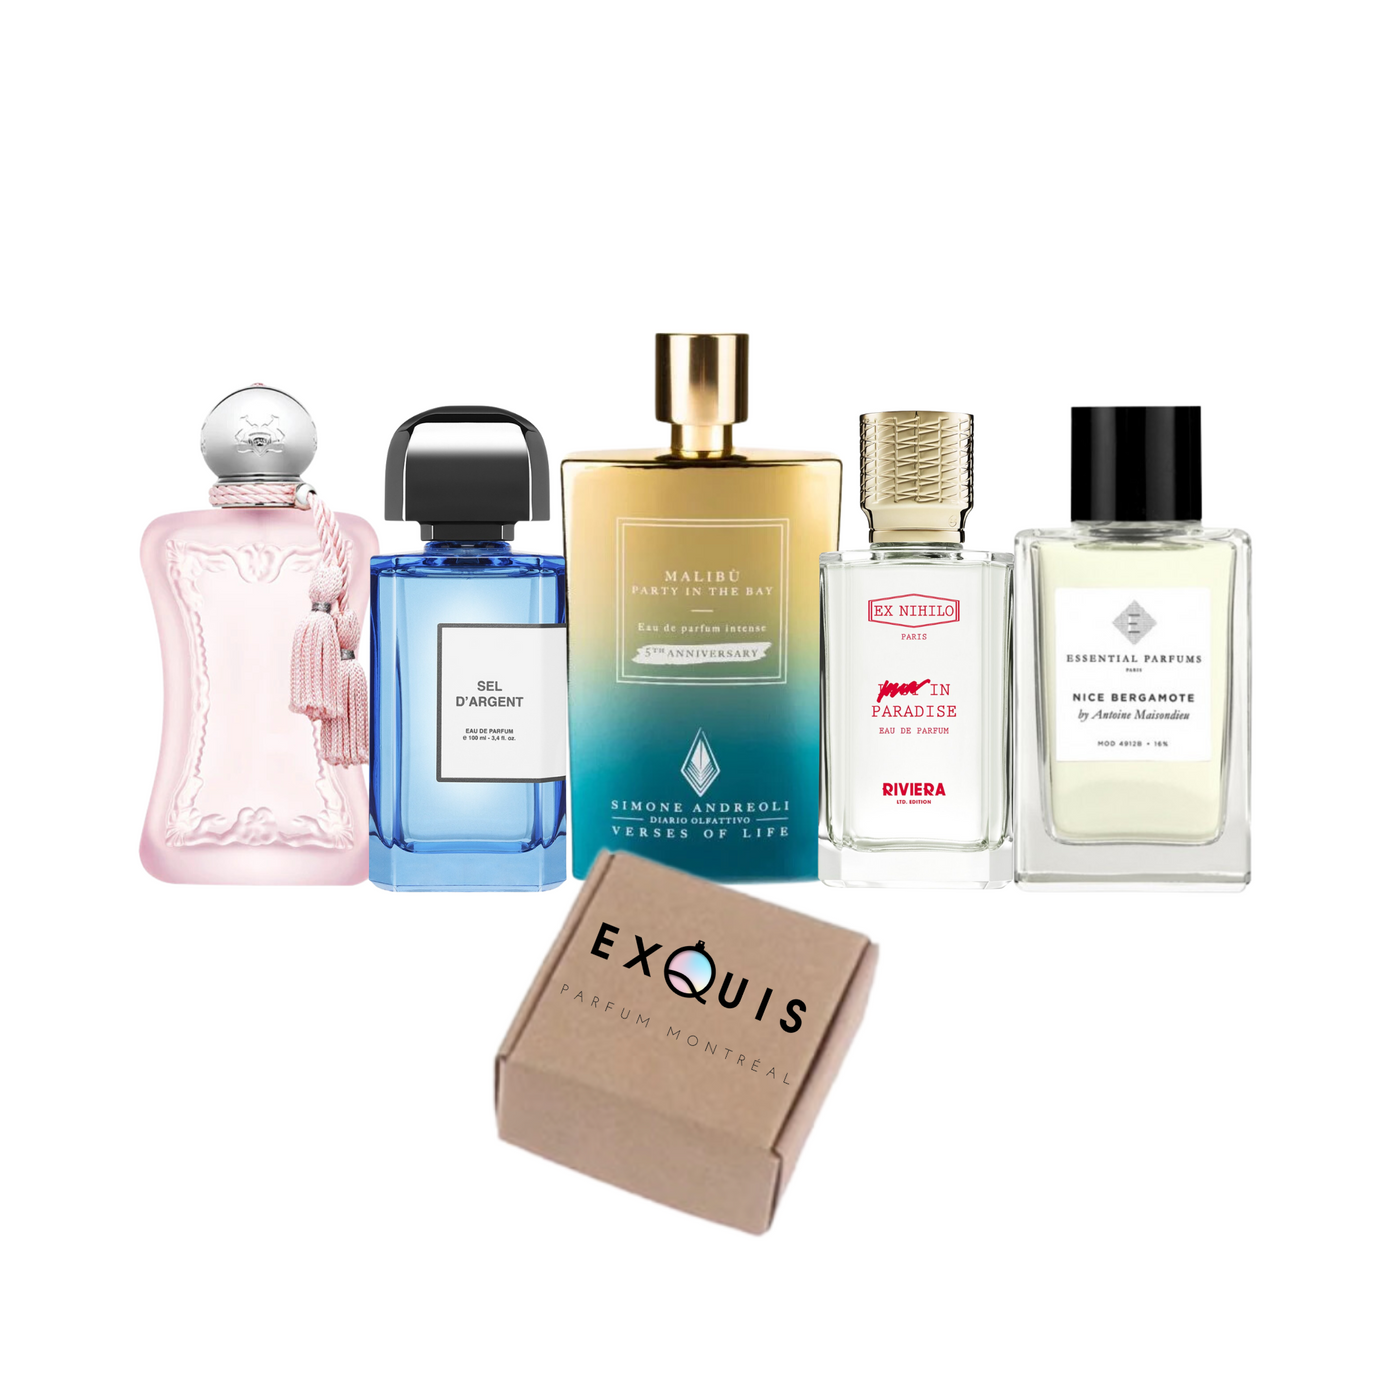 Summer Discovery fragrance set